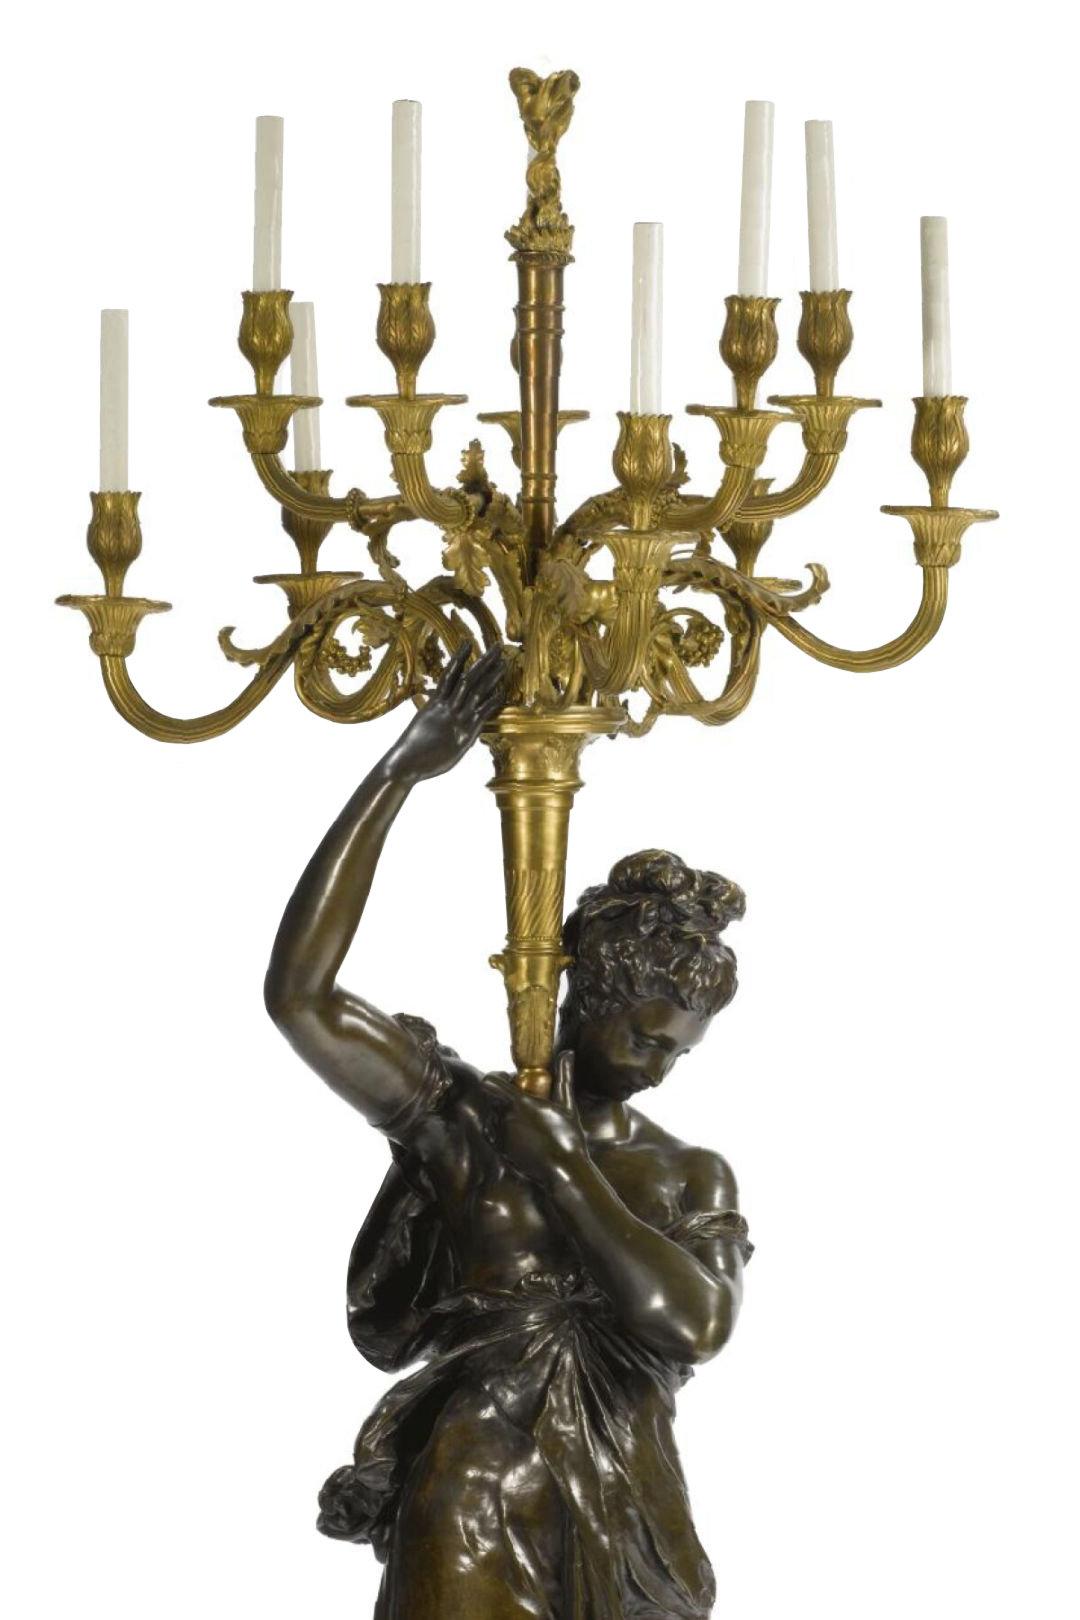 A very fine quality and large Albert-Ernest Carrier-Belleuse (1824-1887) Patinated and gilt bronze figural candelabra/ Torchier lamp.
Wired for electricity.
It comes with a later modern black marble pedestal. ( a much later addition).